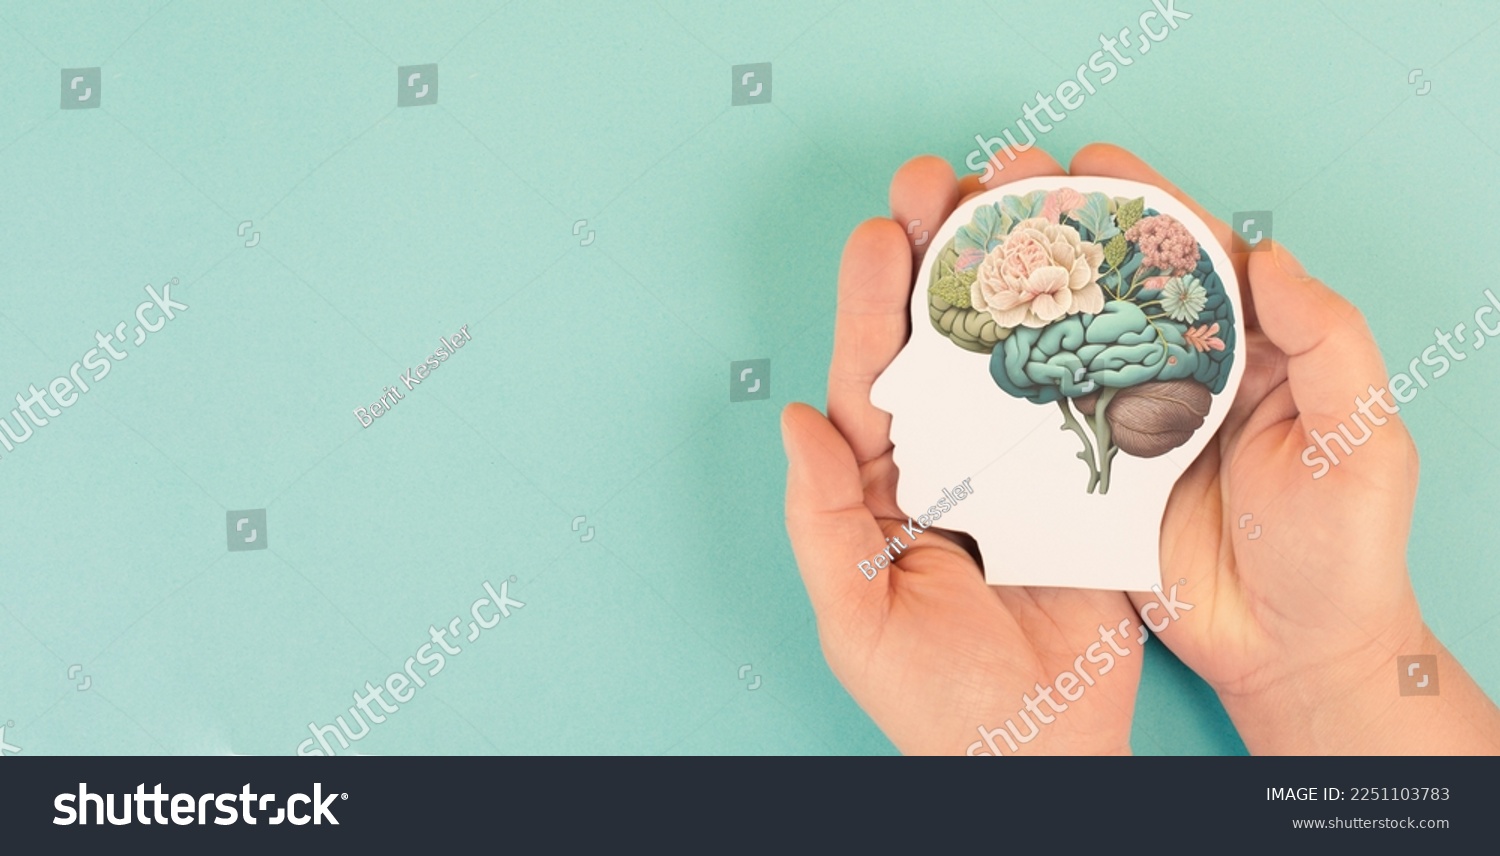 Hands holding paper head, human brain with flowers, self care and mental health concept, positive thinking #2251103783